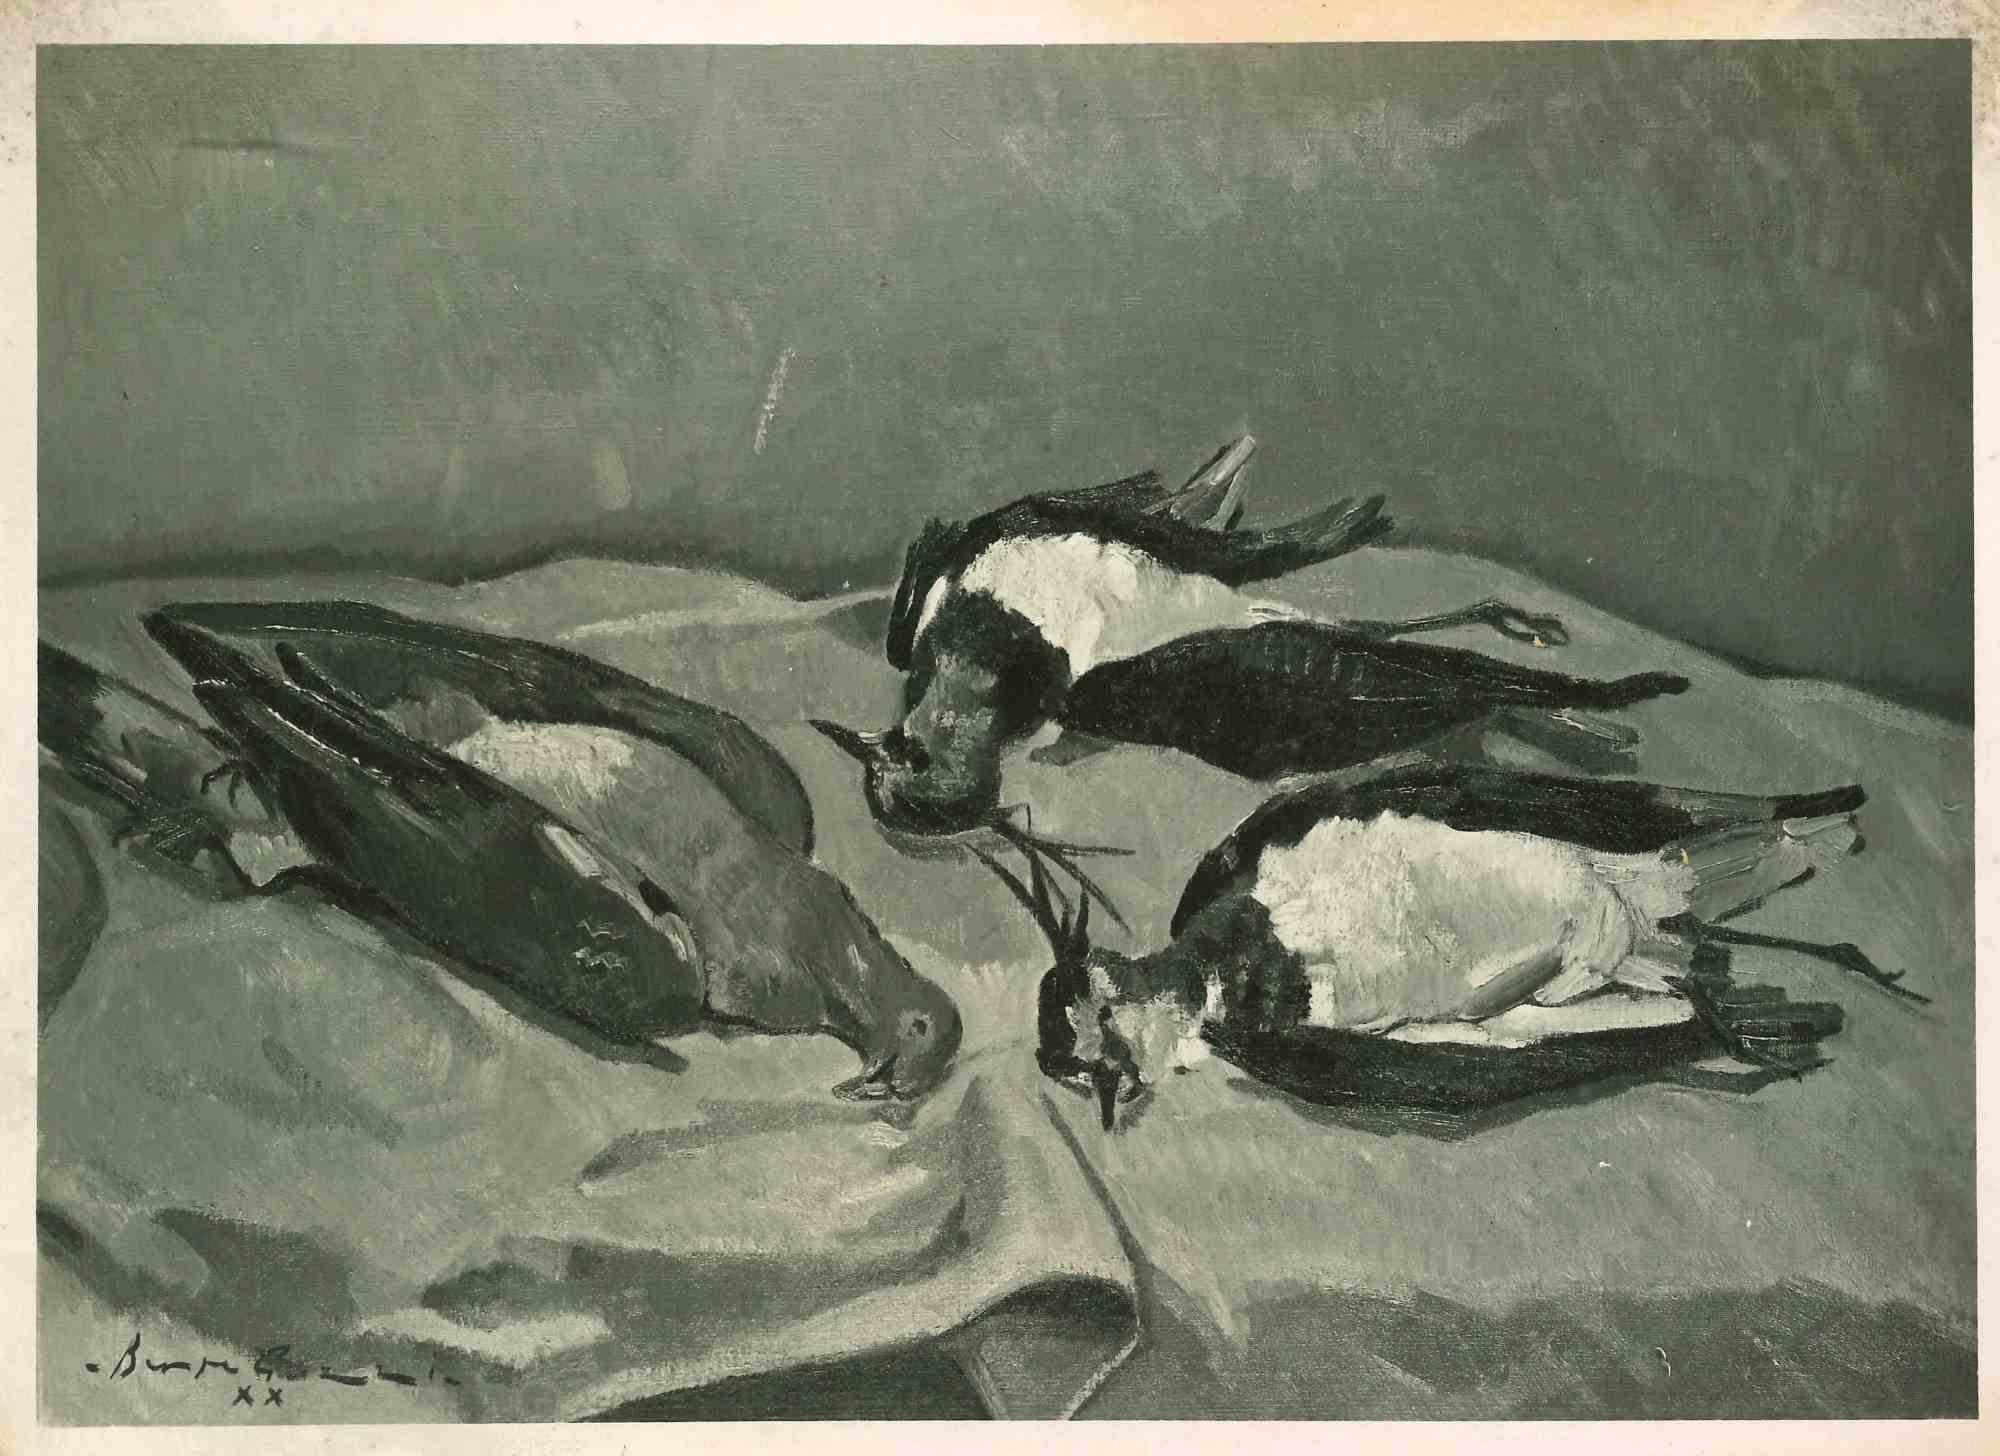 Unknown Figurative Photograph - Vintage Photograph of a Painting by Beppe Guzzi - Mid 20th Century